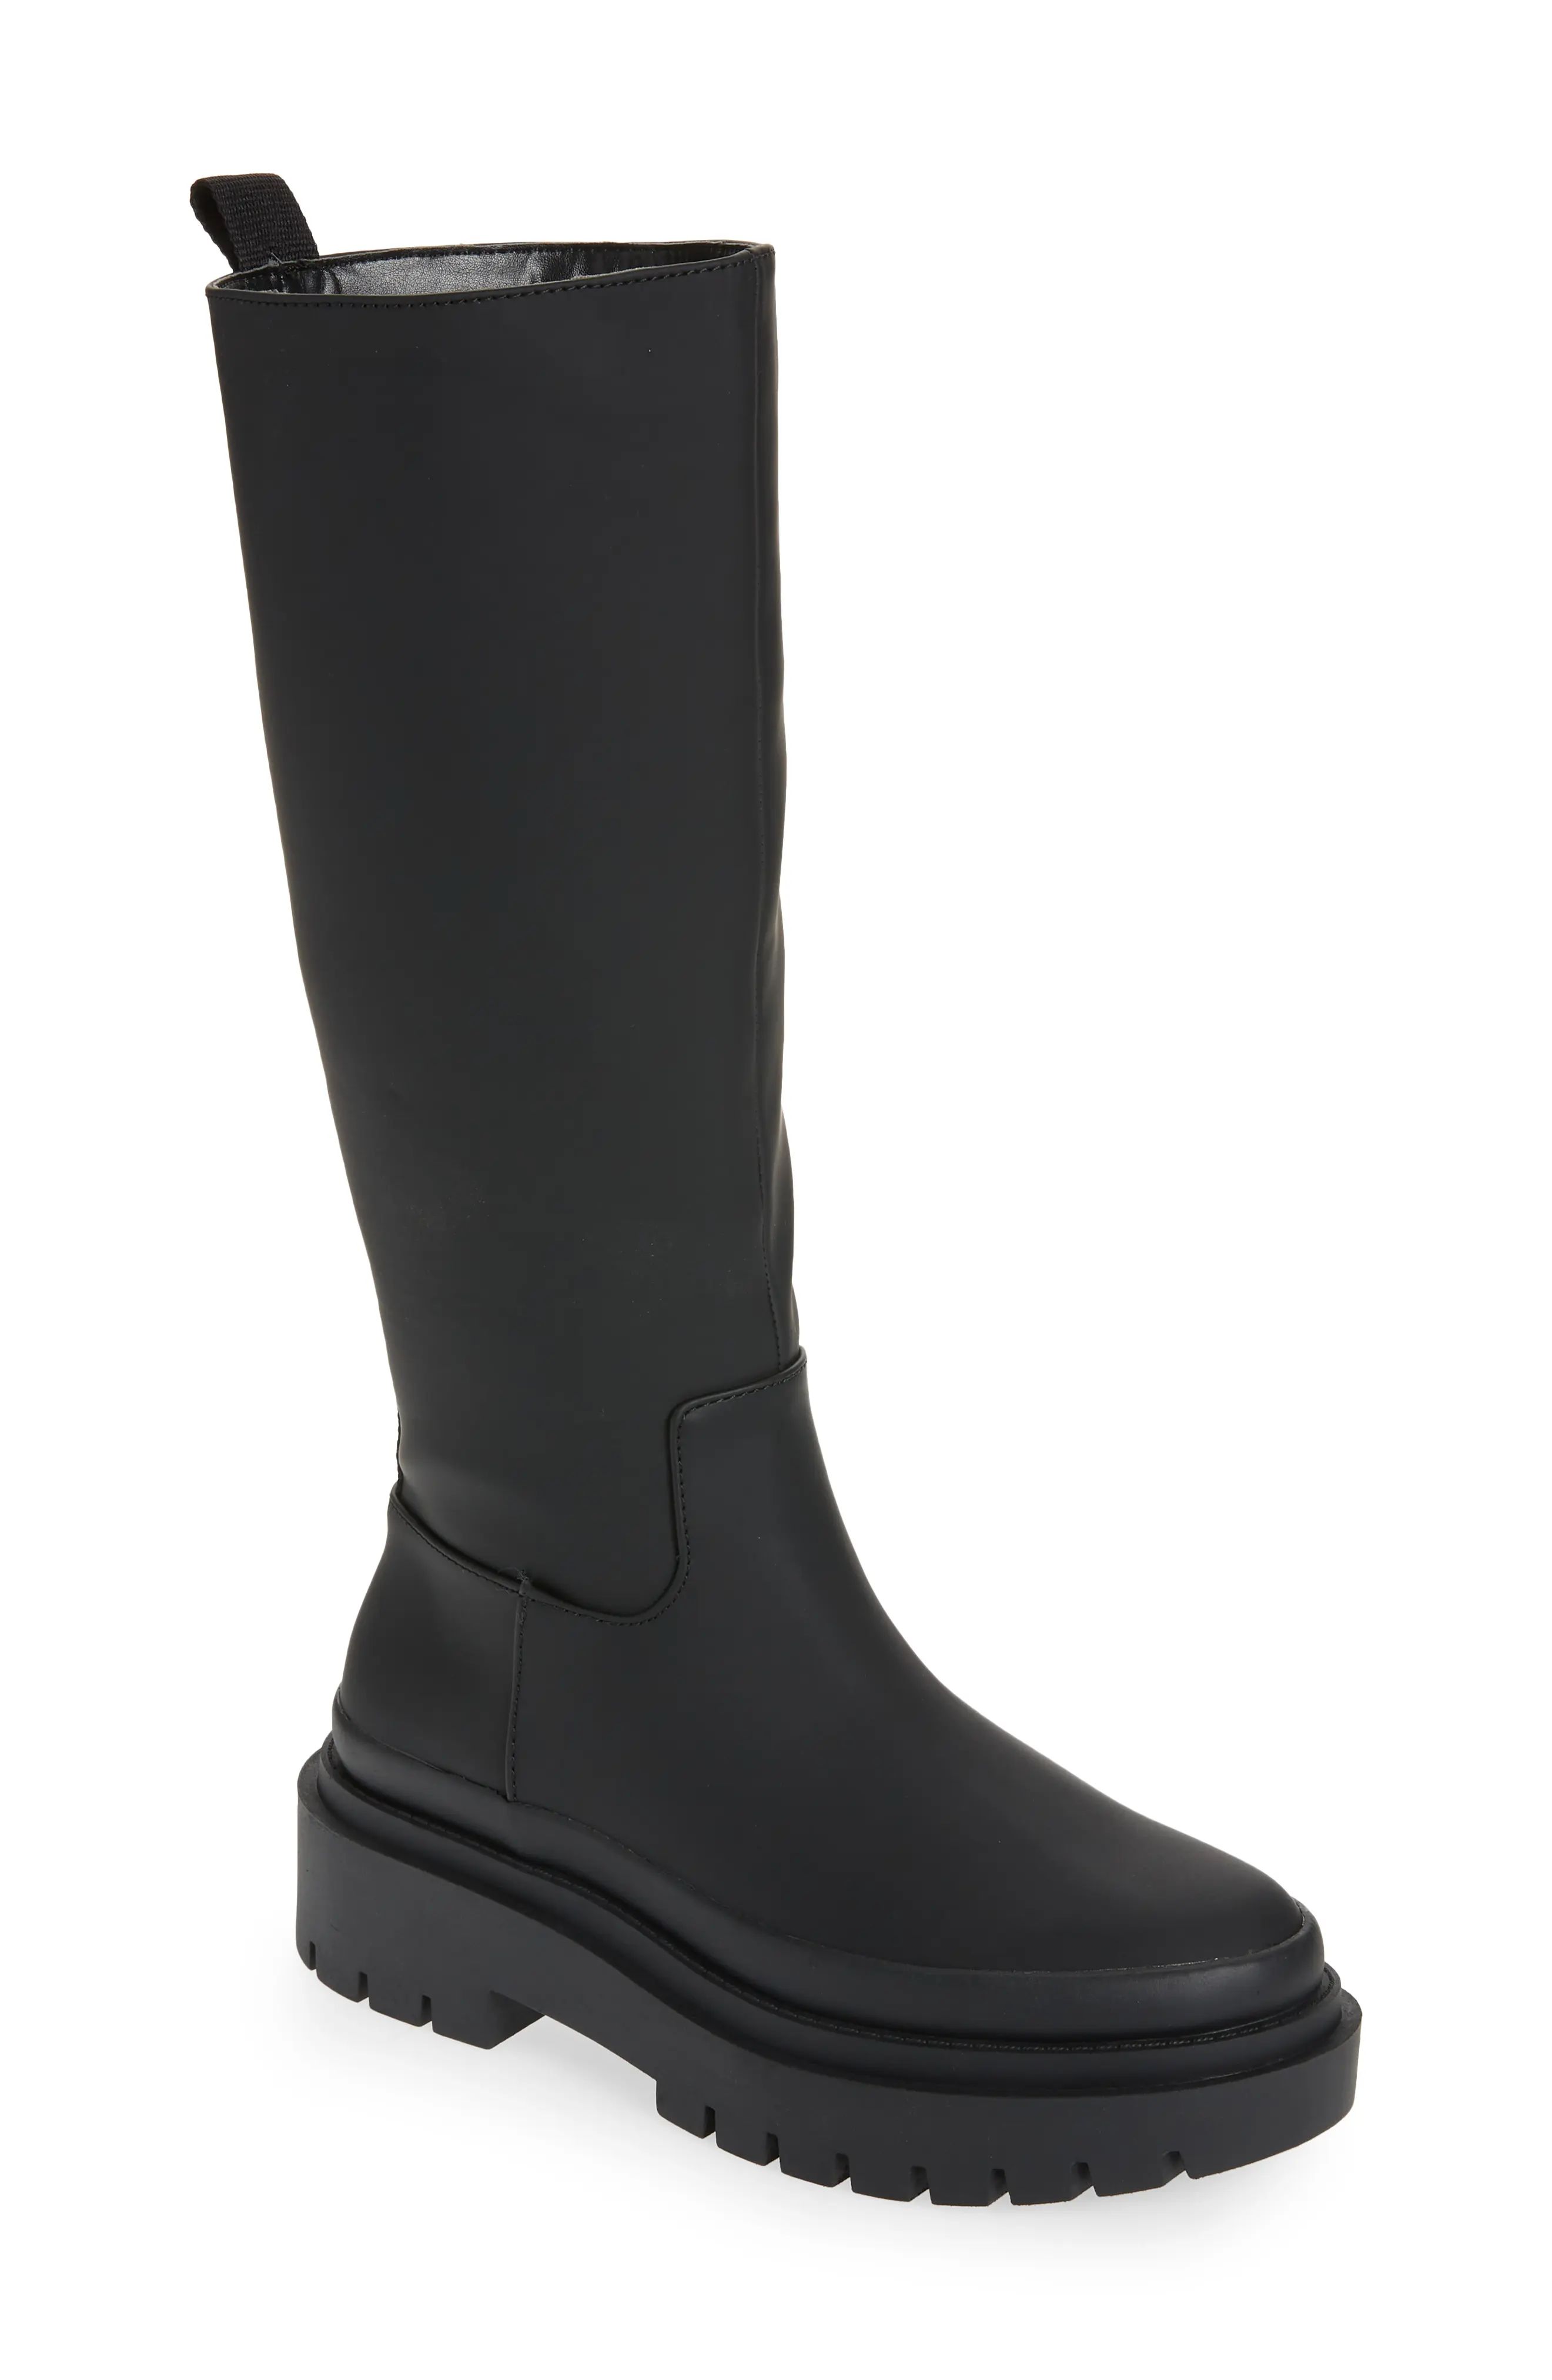 Cool Planet by Steve Madden Magicc Knee High Boot, Size 10 in Black Pari at Nordstrom | Nordstrom